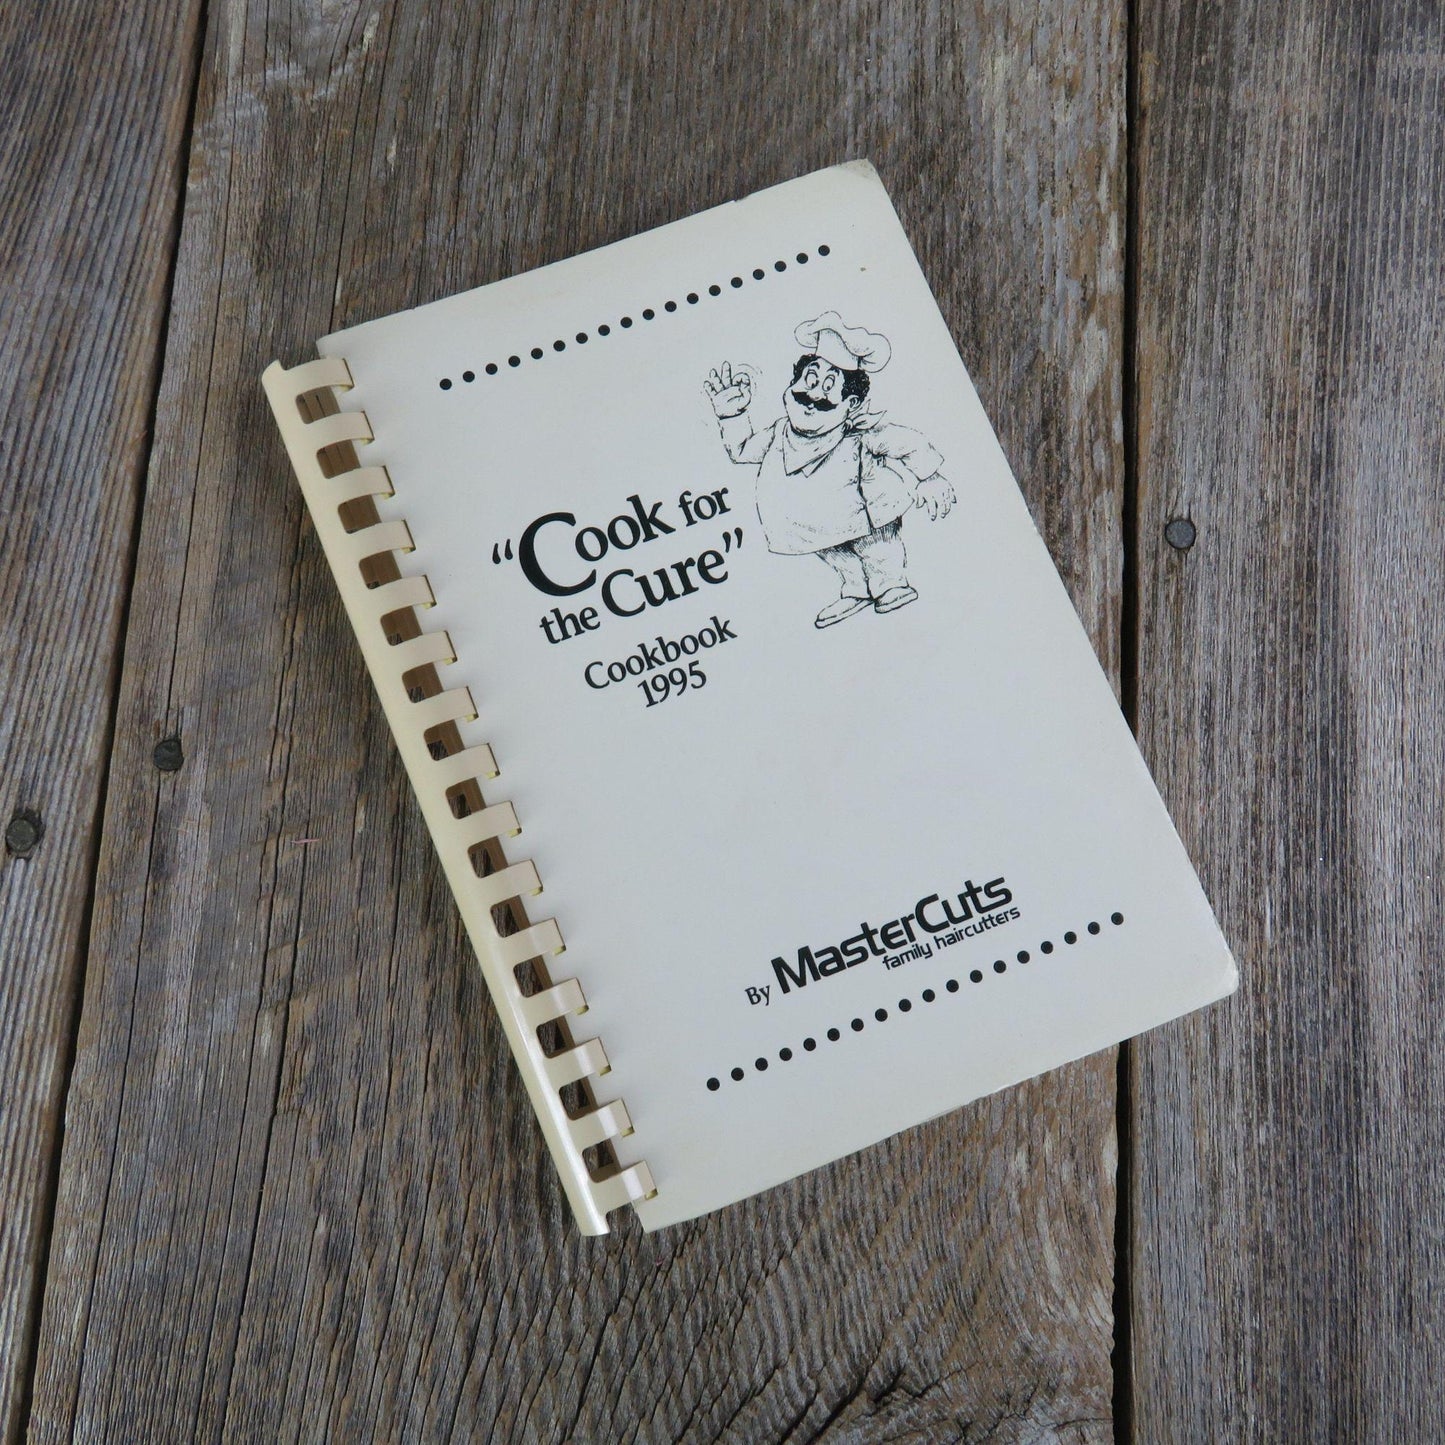 Vintage Master Cuts Cookbook Employees Cook for the Cure Breast Cancer Fundraiser 1995